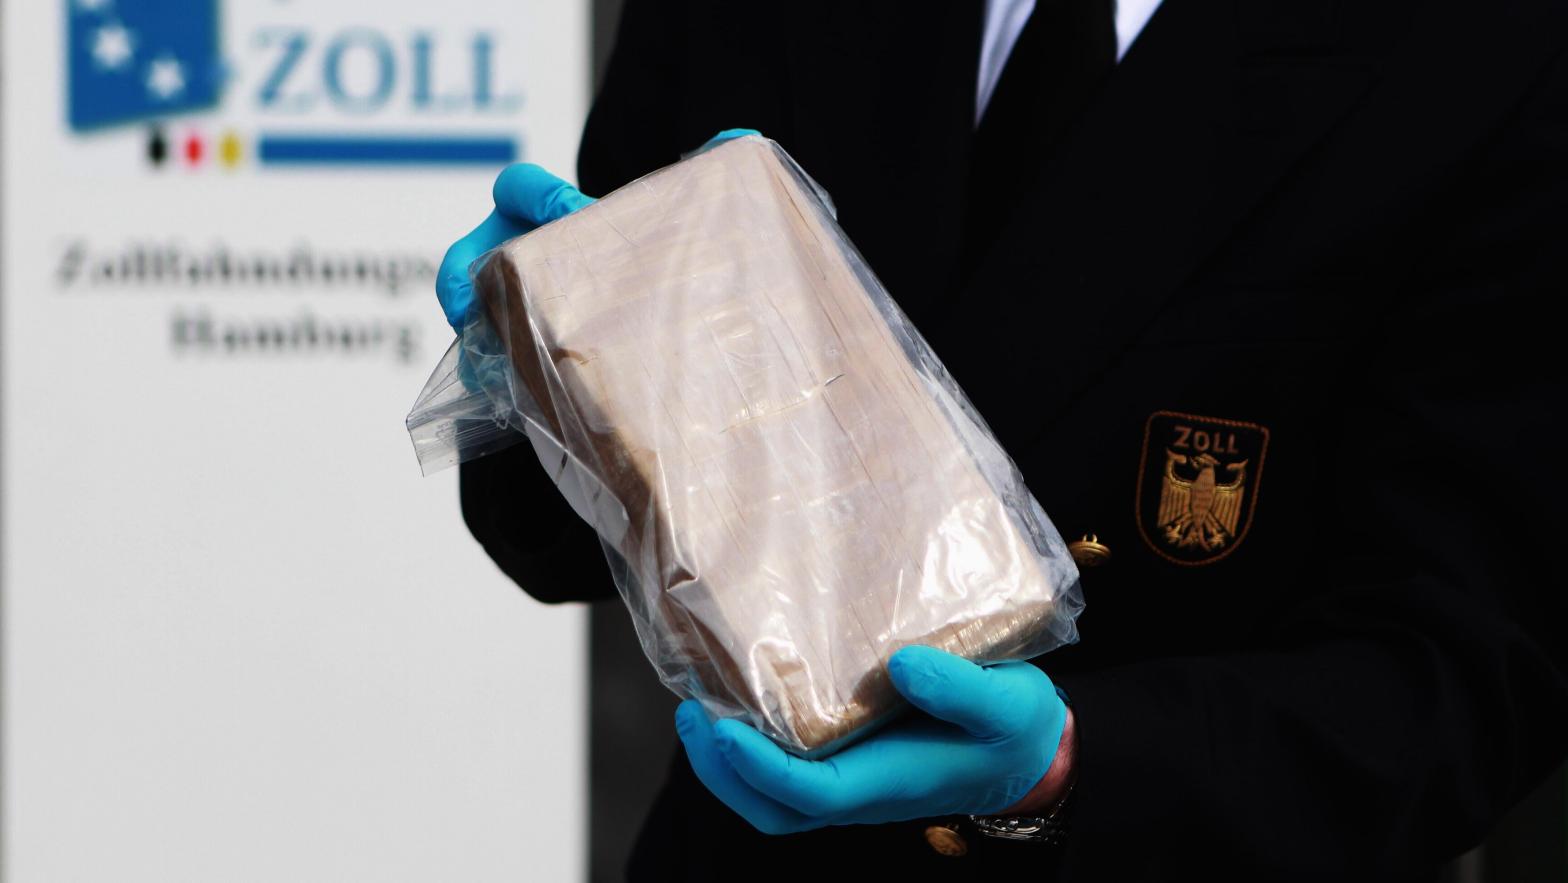 German customs agents shows a package containing confiscated cocaine at a press conference on March 4, 2012 in Hamburg, Germany. (Photo: Joern Pollex, Getty Images)